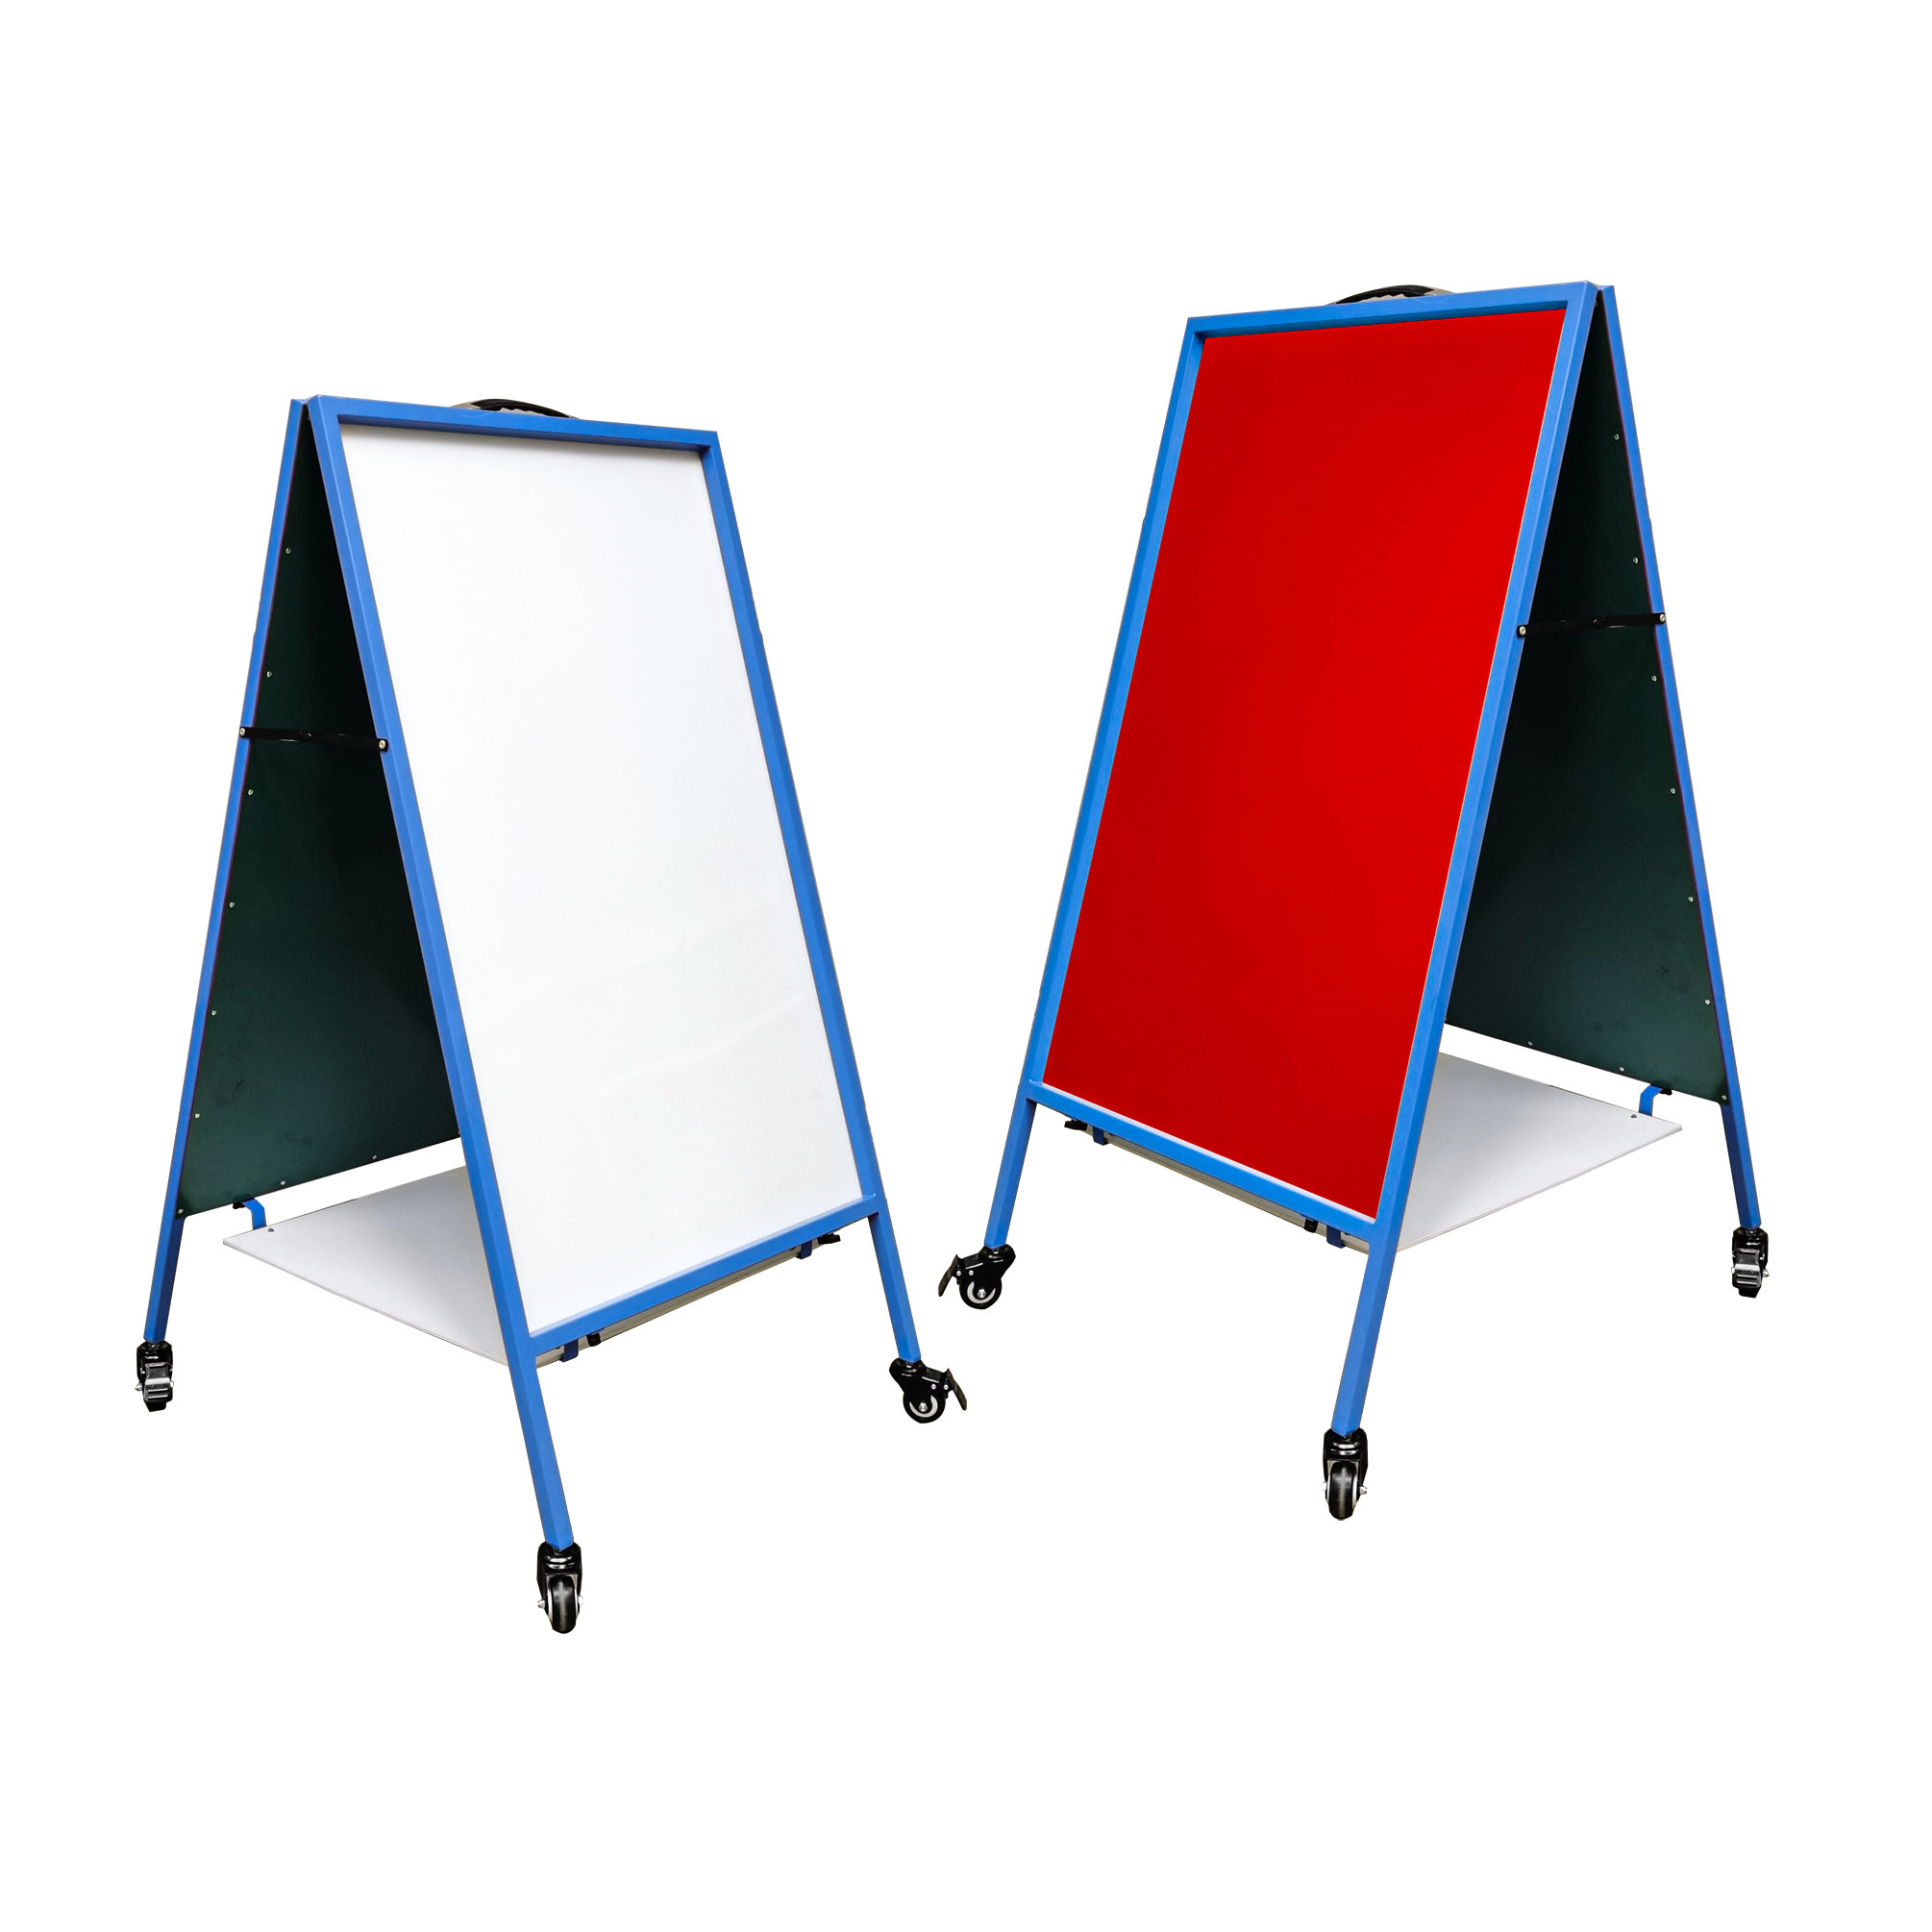 FixtureDisplays Double-Sided Easel with Dry Erase Magnetic Surfaces - Blue